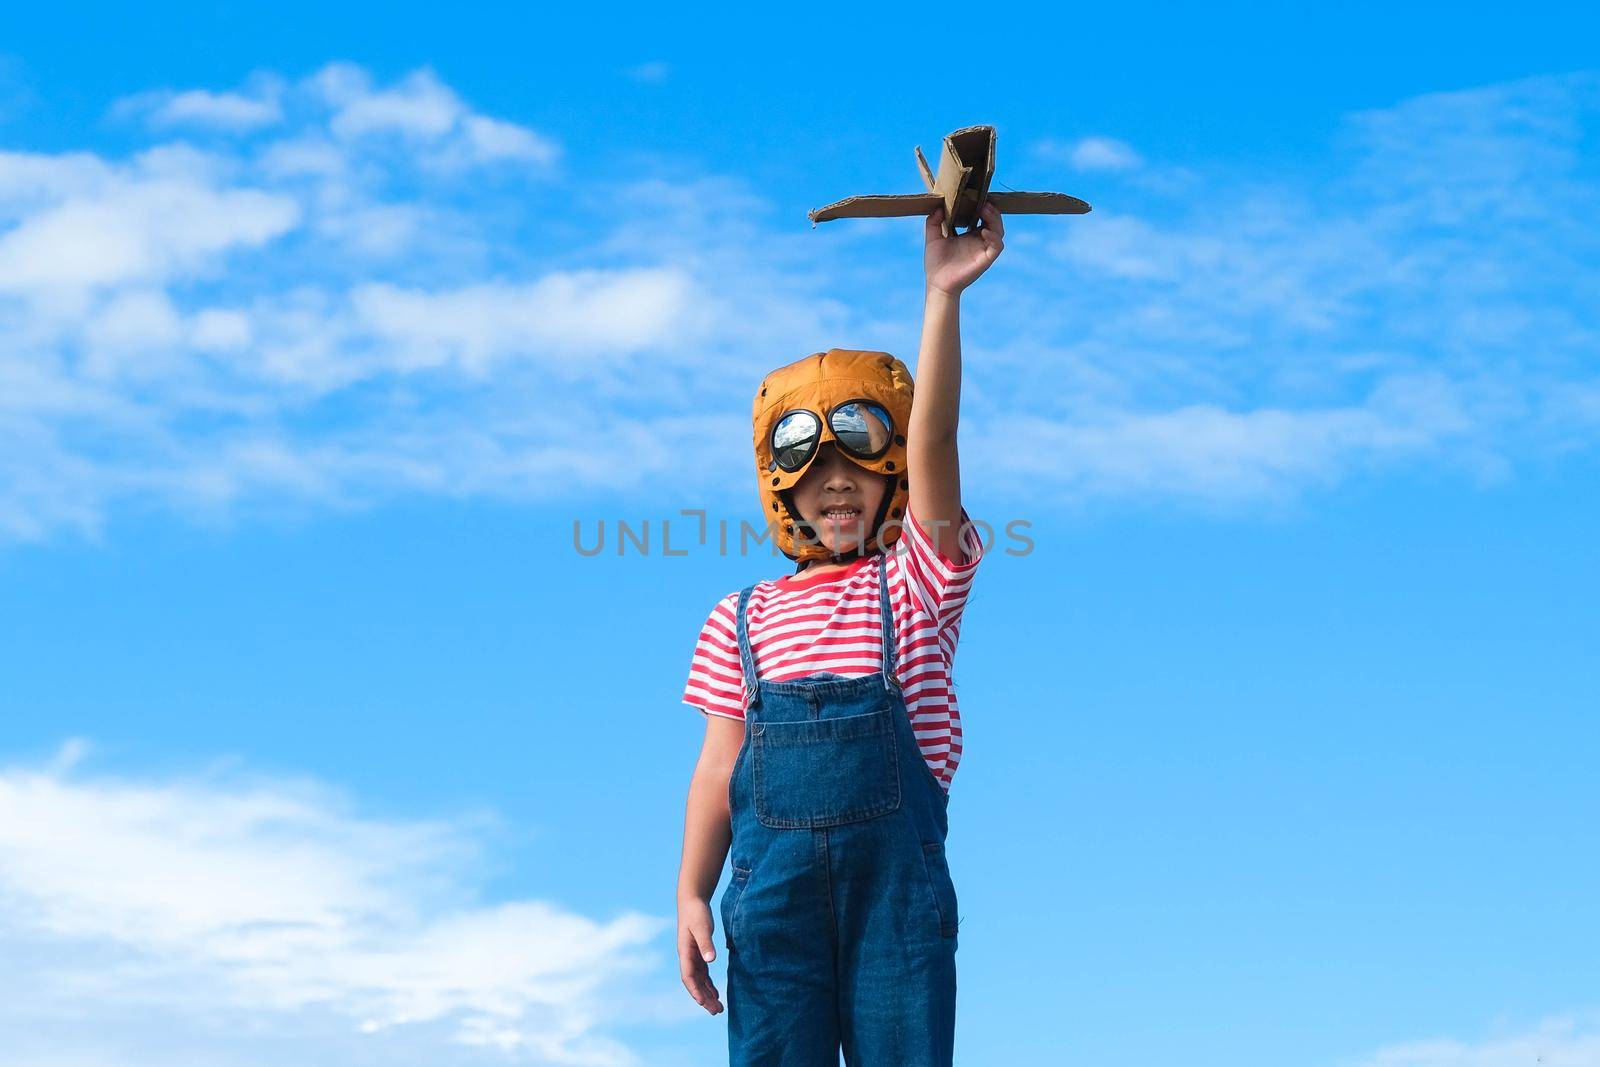 Cute little girl running through the meadow on a sunny day with a toy plane in hand. Happy kid playing with cardboard plane against blue summer sky background. Childhood dream imagination concept. by TEERASAK